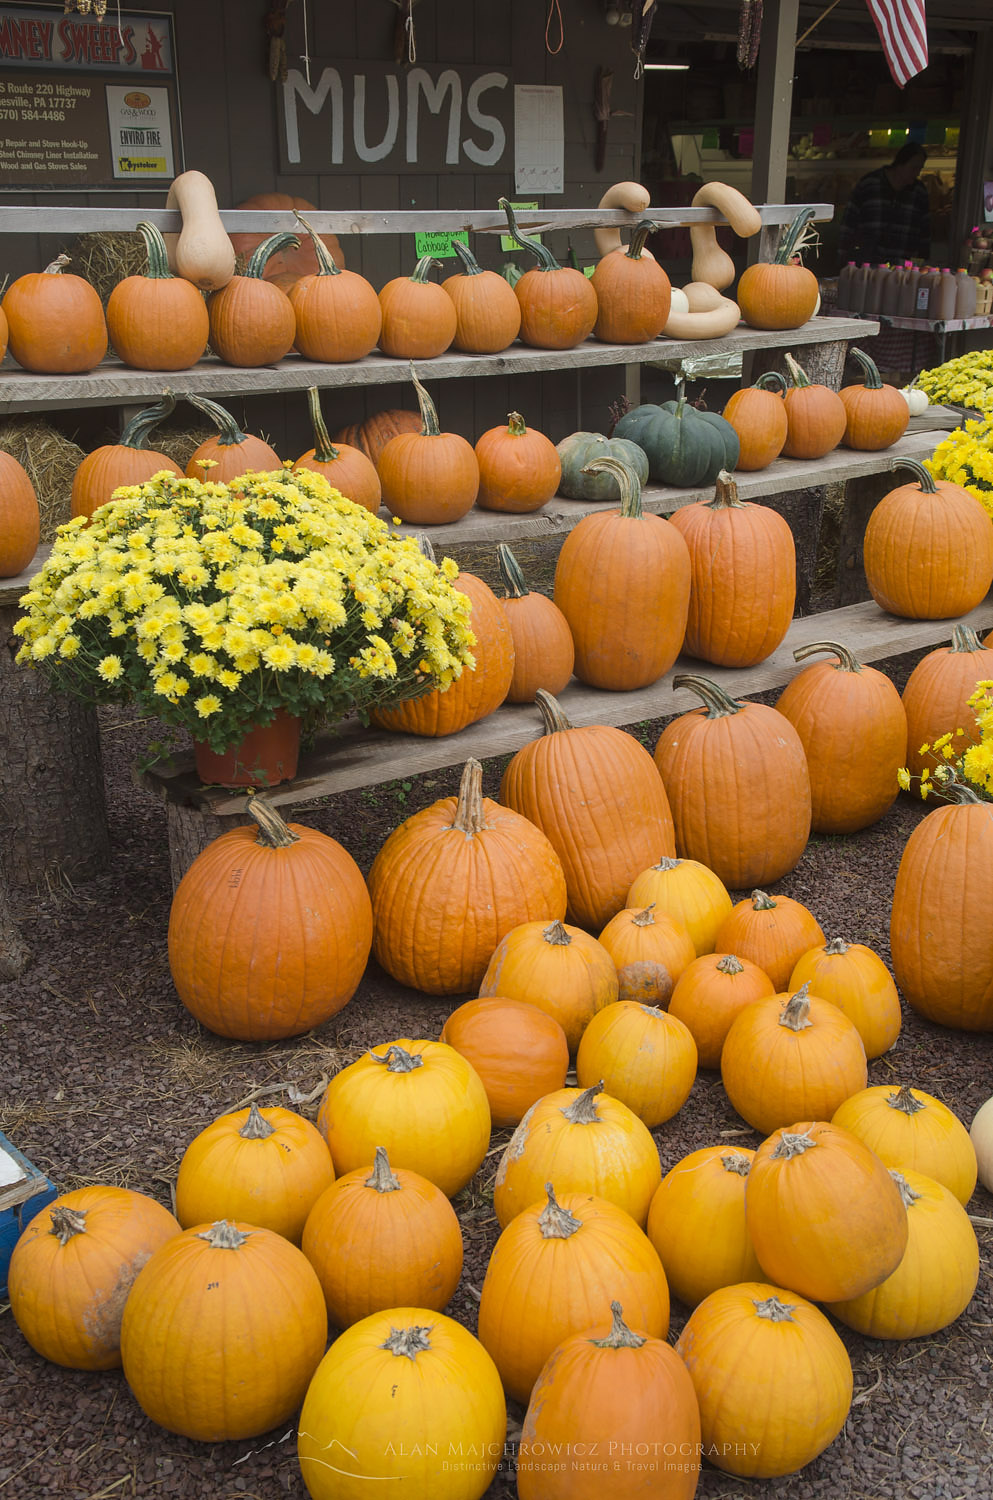 Pennsylvania Farmstand with an assortment of pumpkins gourds and flowers #59636